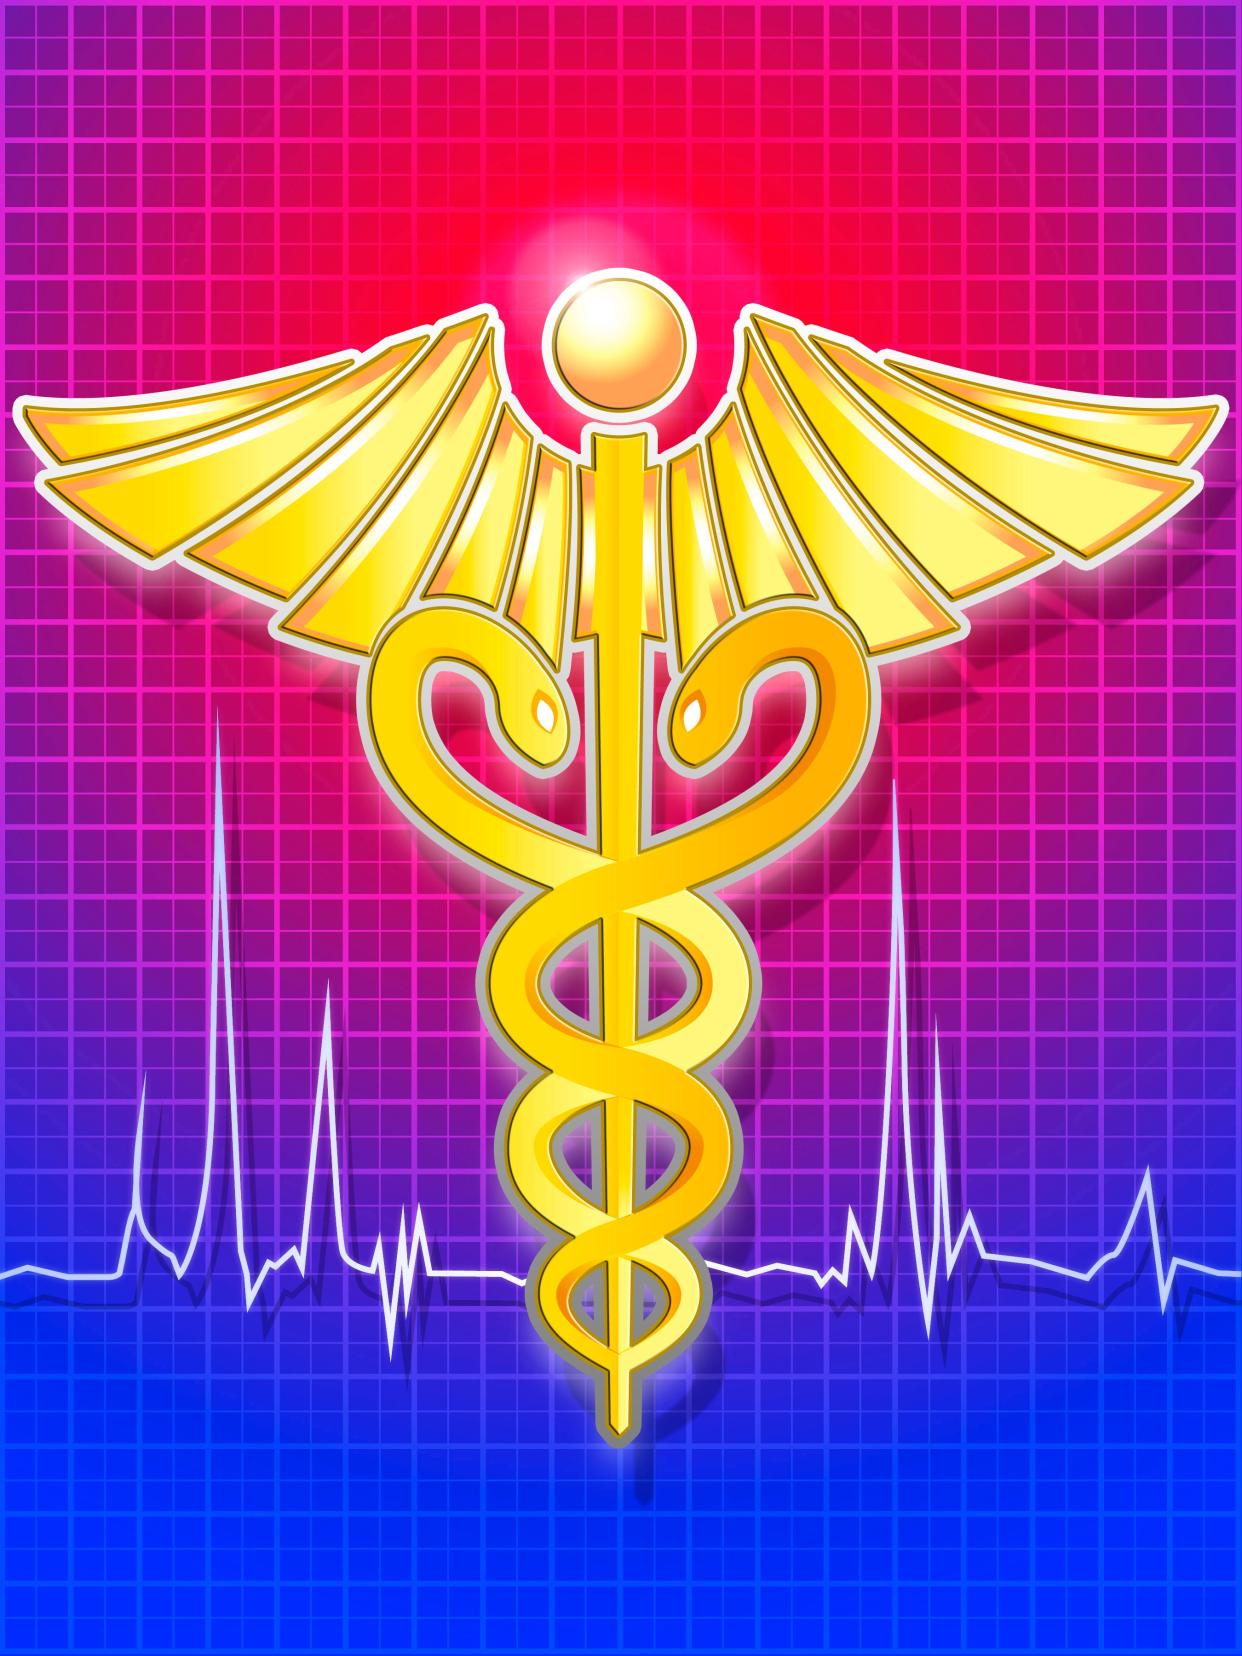 caduceus, full-color, grid, healing, health, health care, healthcare, heart monitor, medical, medical science, medical symbol, medicine, physician, realistic, royalty free, science, symbols